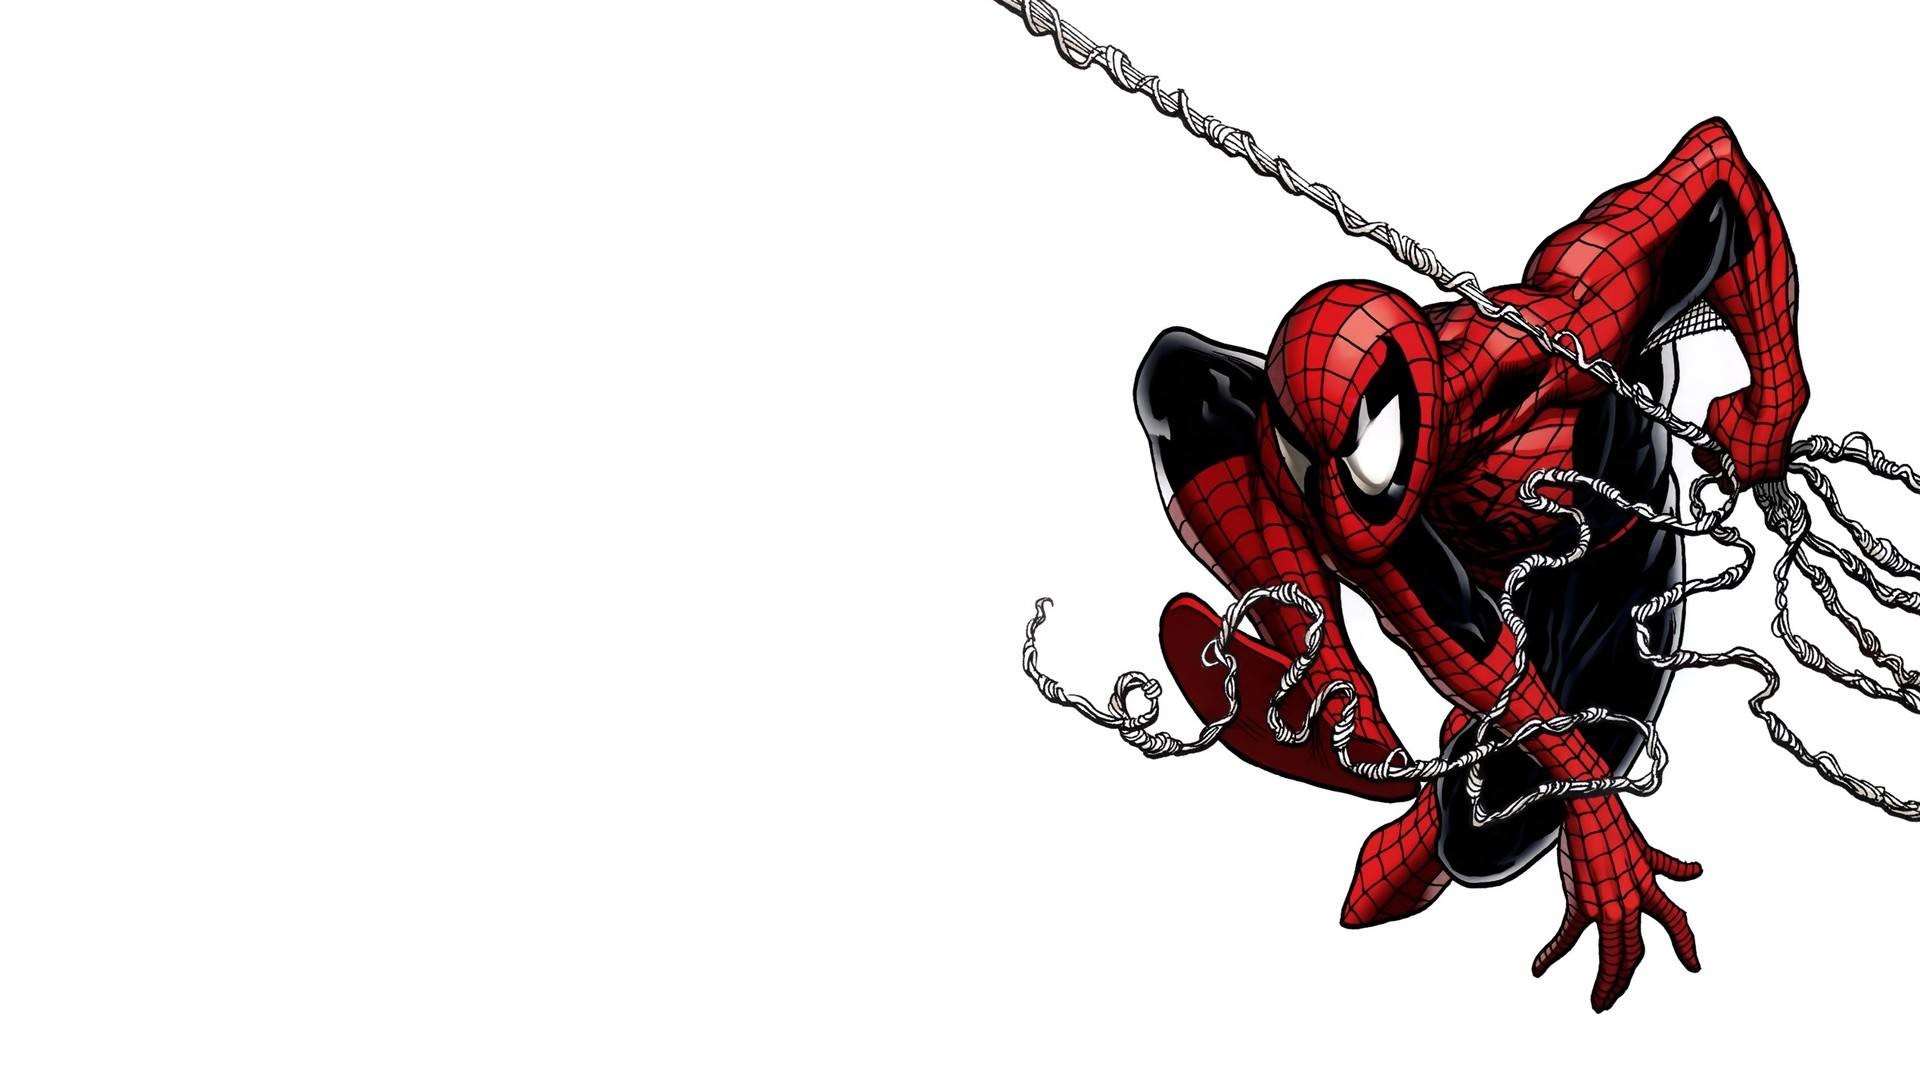 1920x1080 Spiderman Comic Wallpapers Background